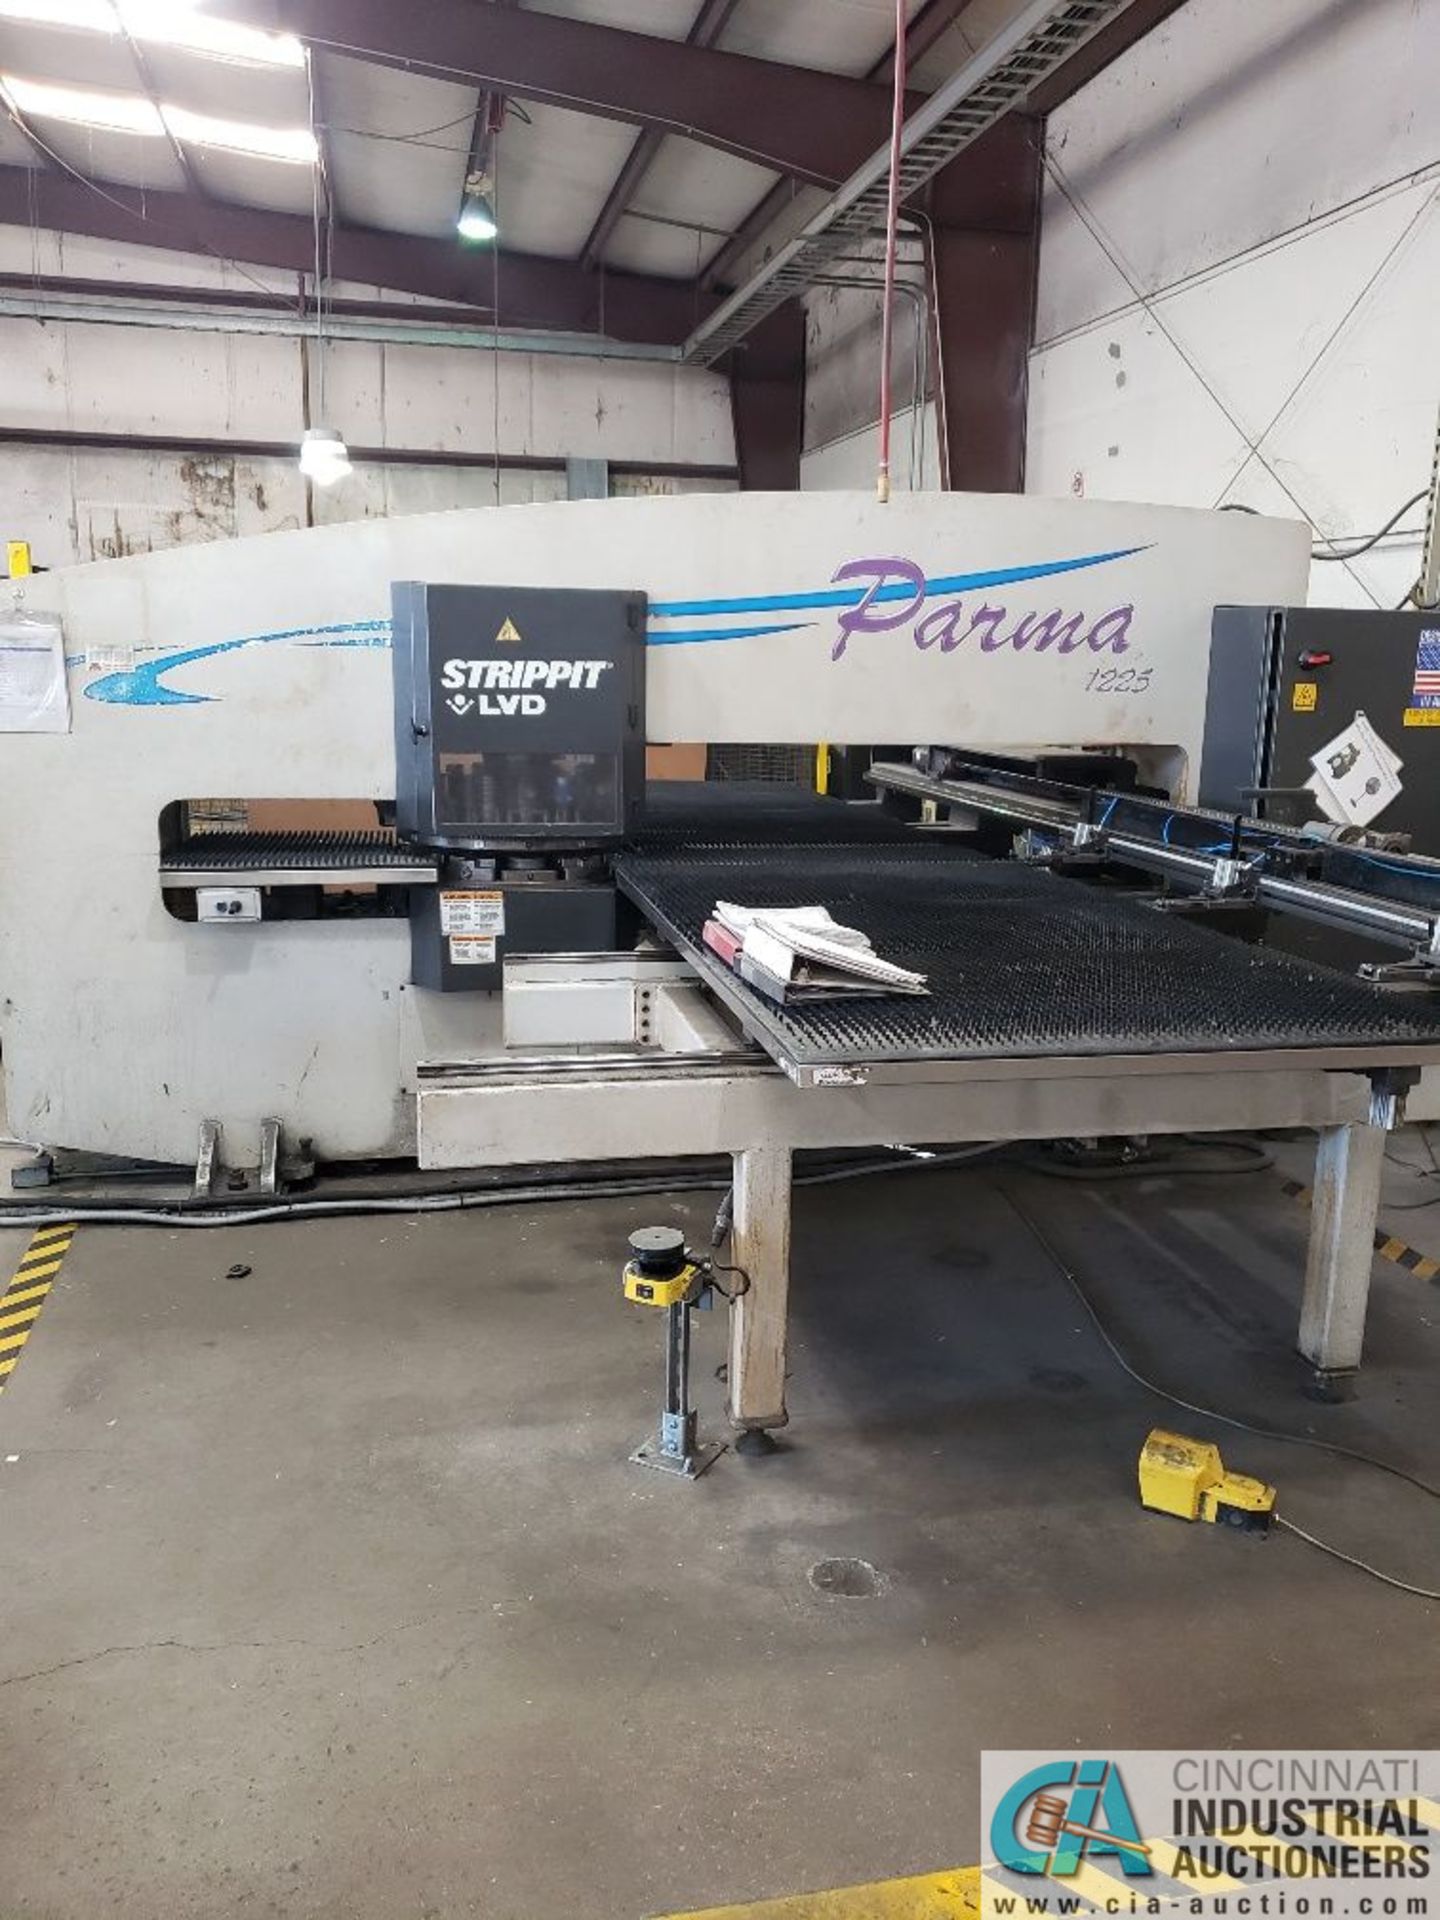 20 Ton Strippit Model Parma 1225 CNC Turret **Loading Fee Due the "ERRA" DFW Movers, $3,750.00** - Image 2 of 12